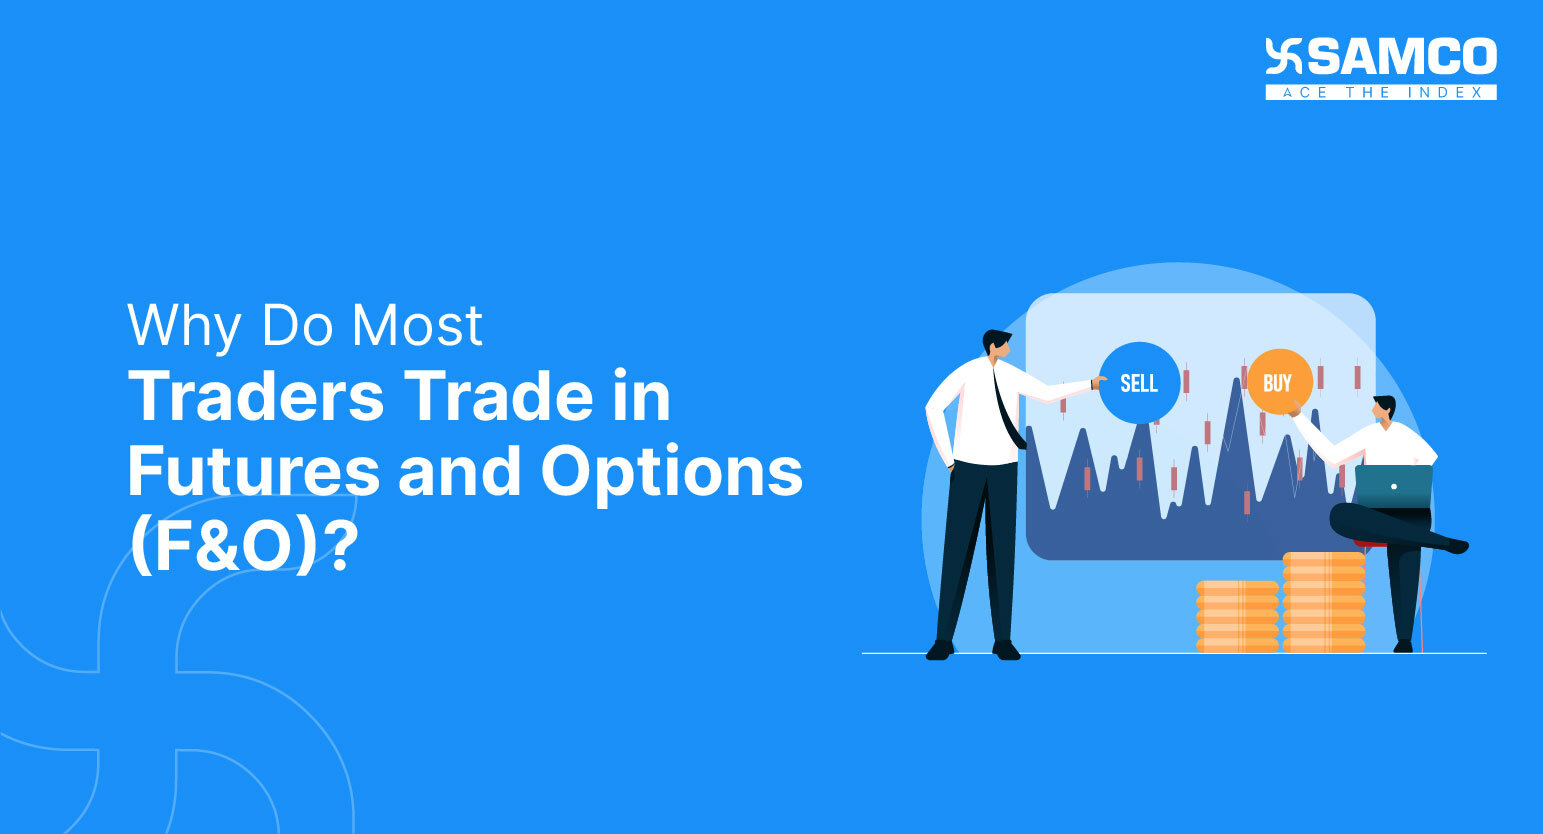 Why Do Most Traders Trade in Futures and Options (F&O)?